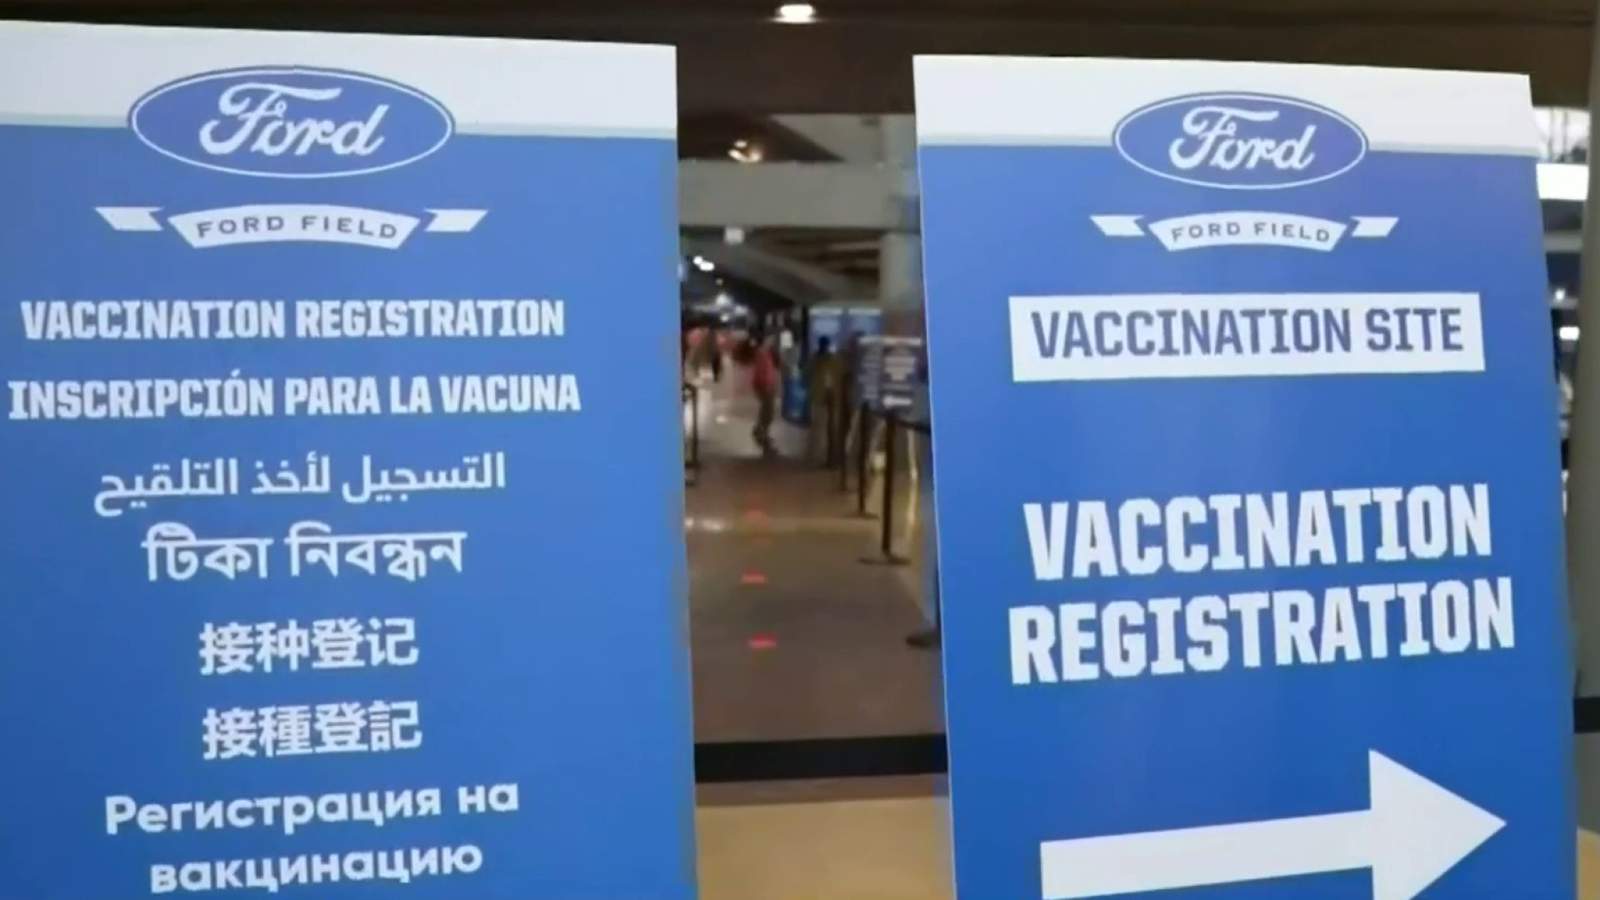 Metro Detroit parents prepare to vaccinate teens, urge other parents to do same